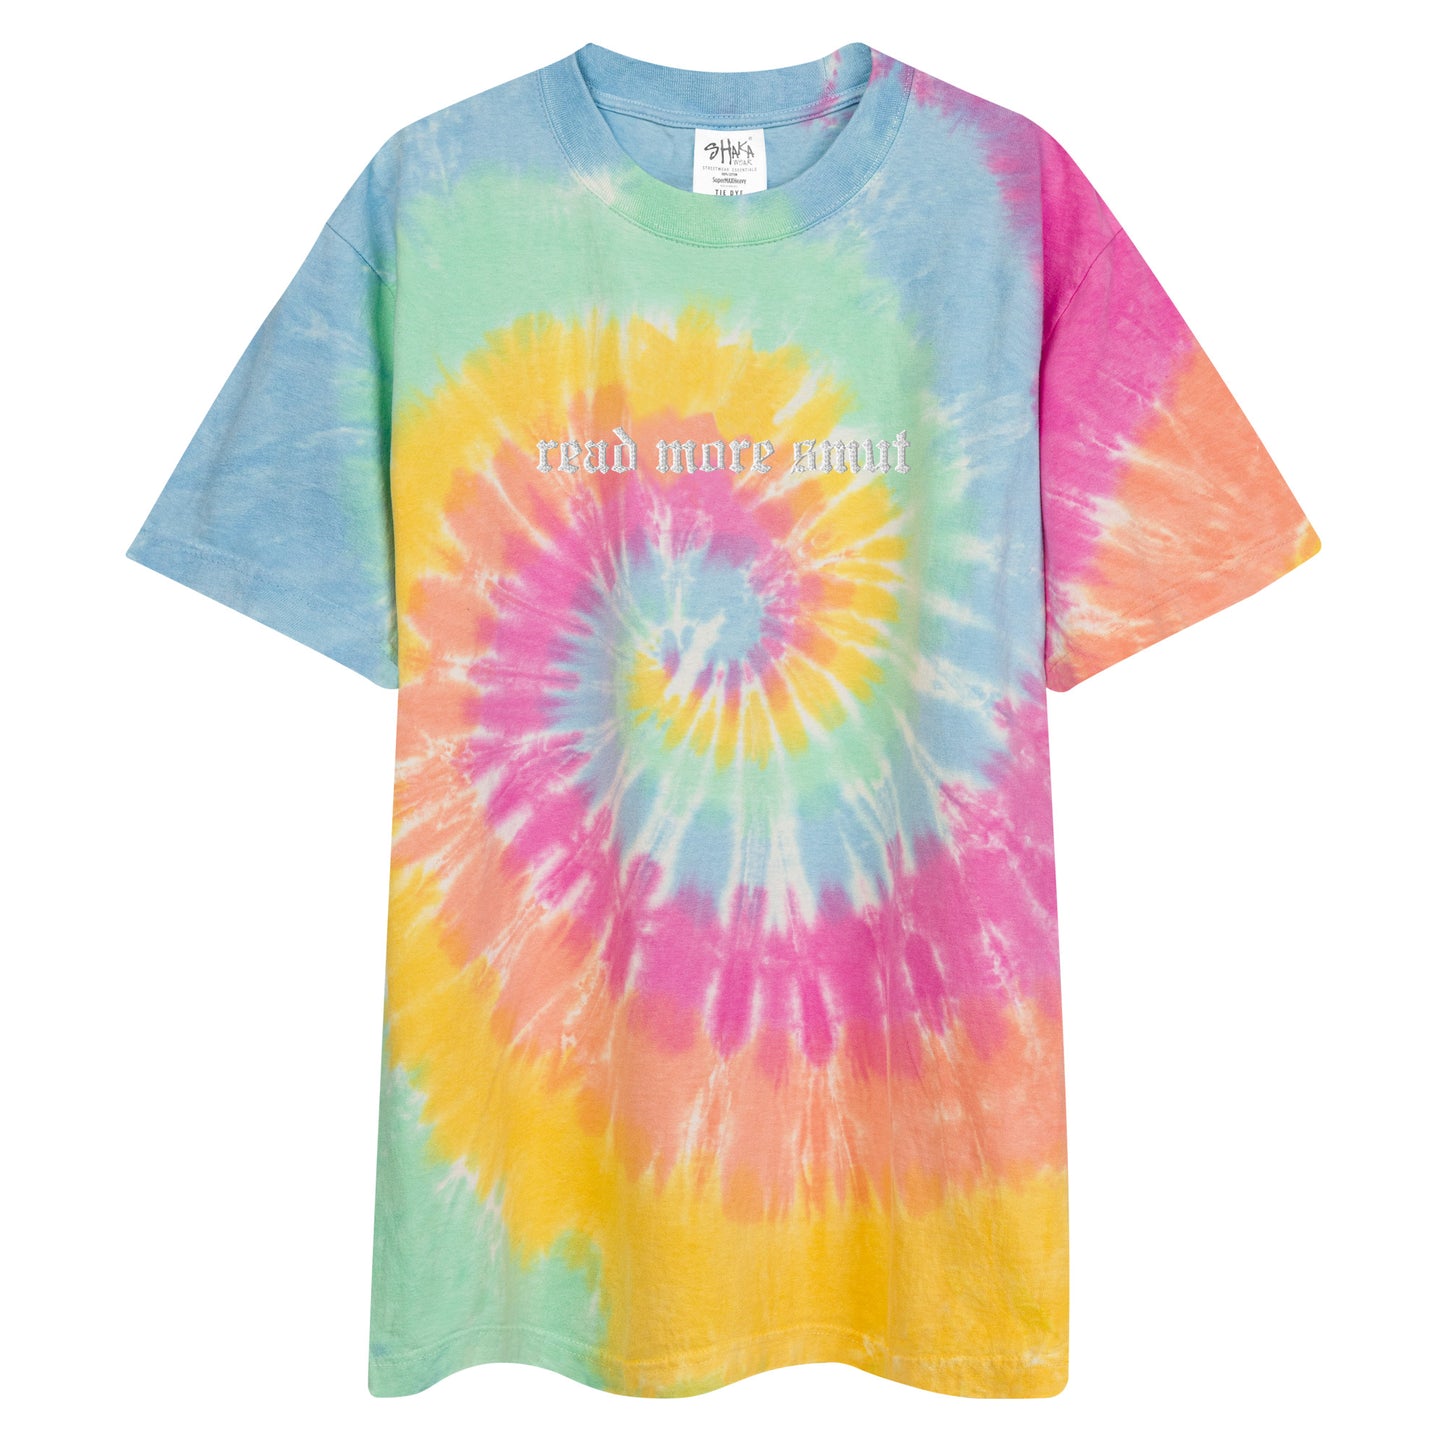 read more smut embroidered tie-dye t-shirt